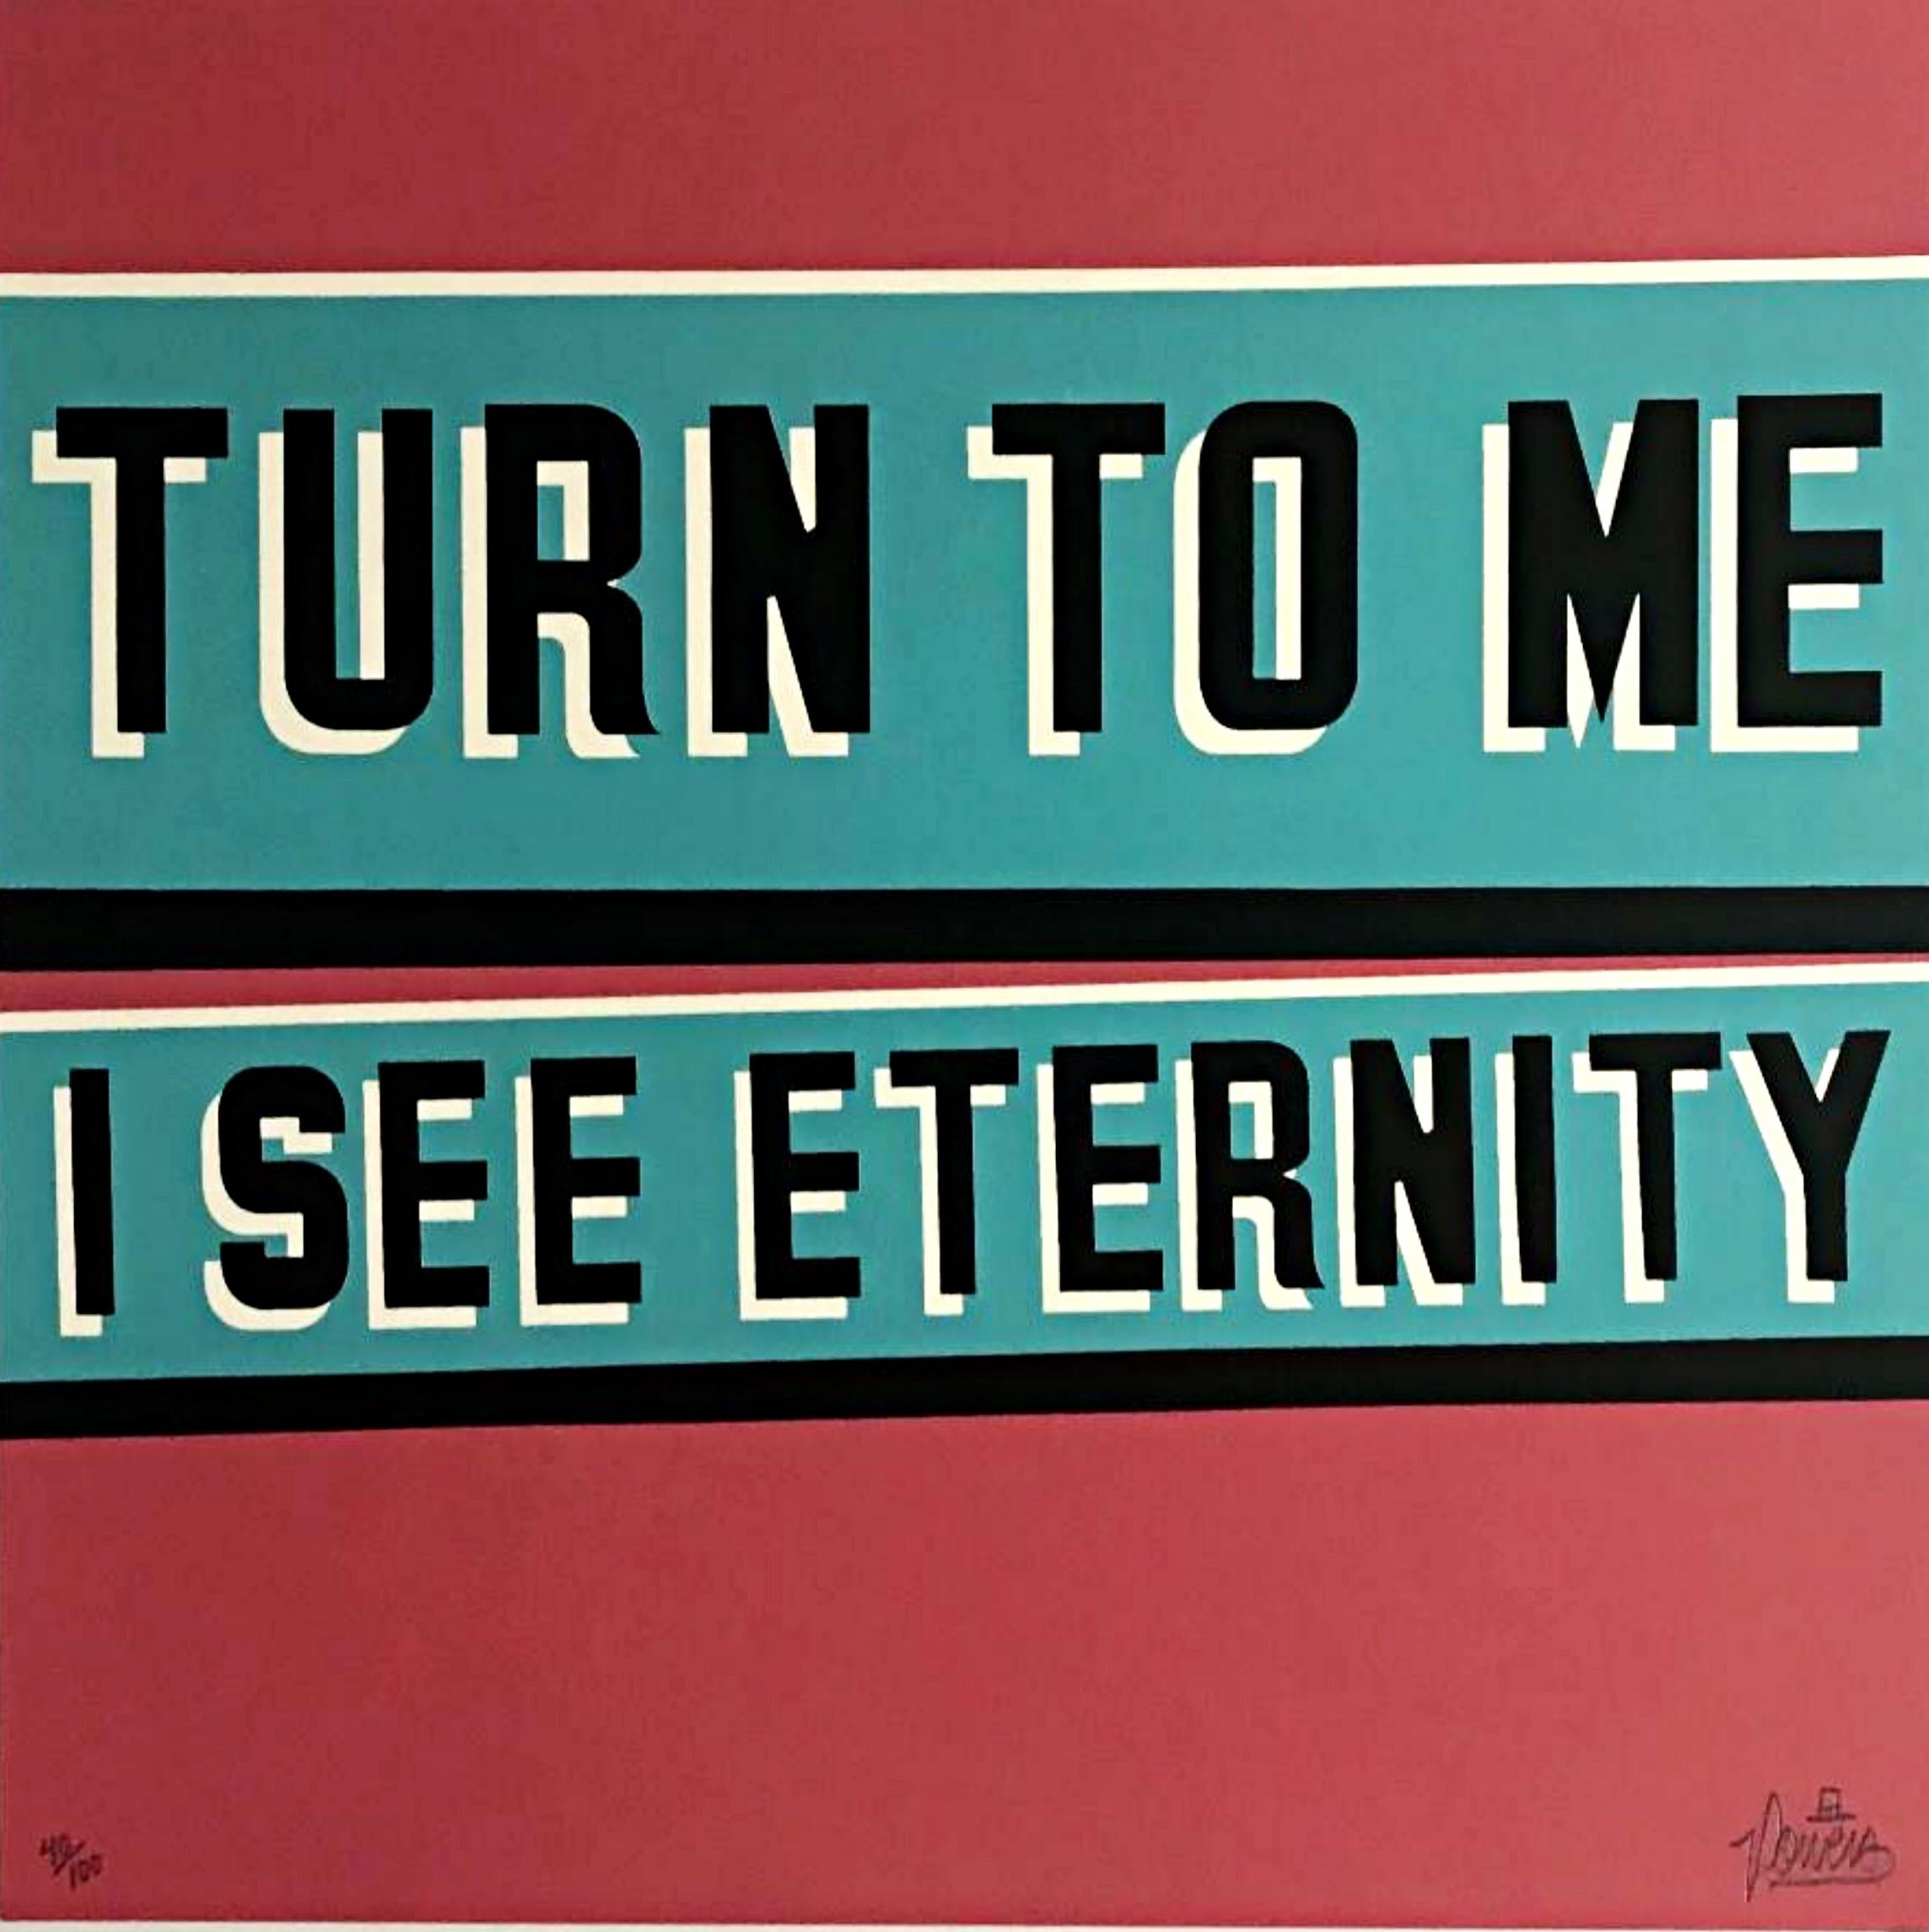 Stephen Powers Abstract Print - Turn to Me I See Eternity - popular limited edition Valentine's day print 